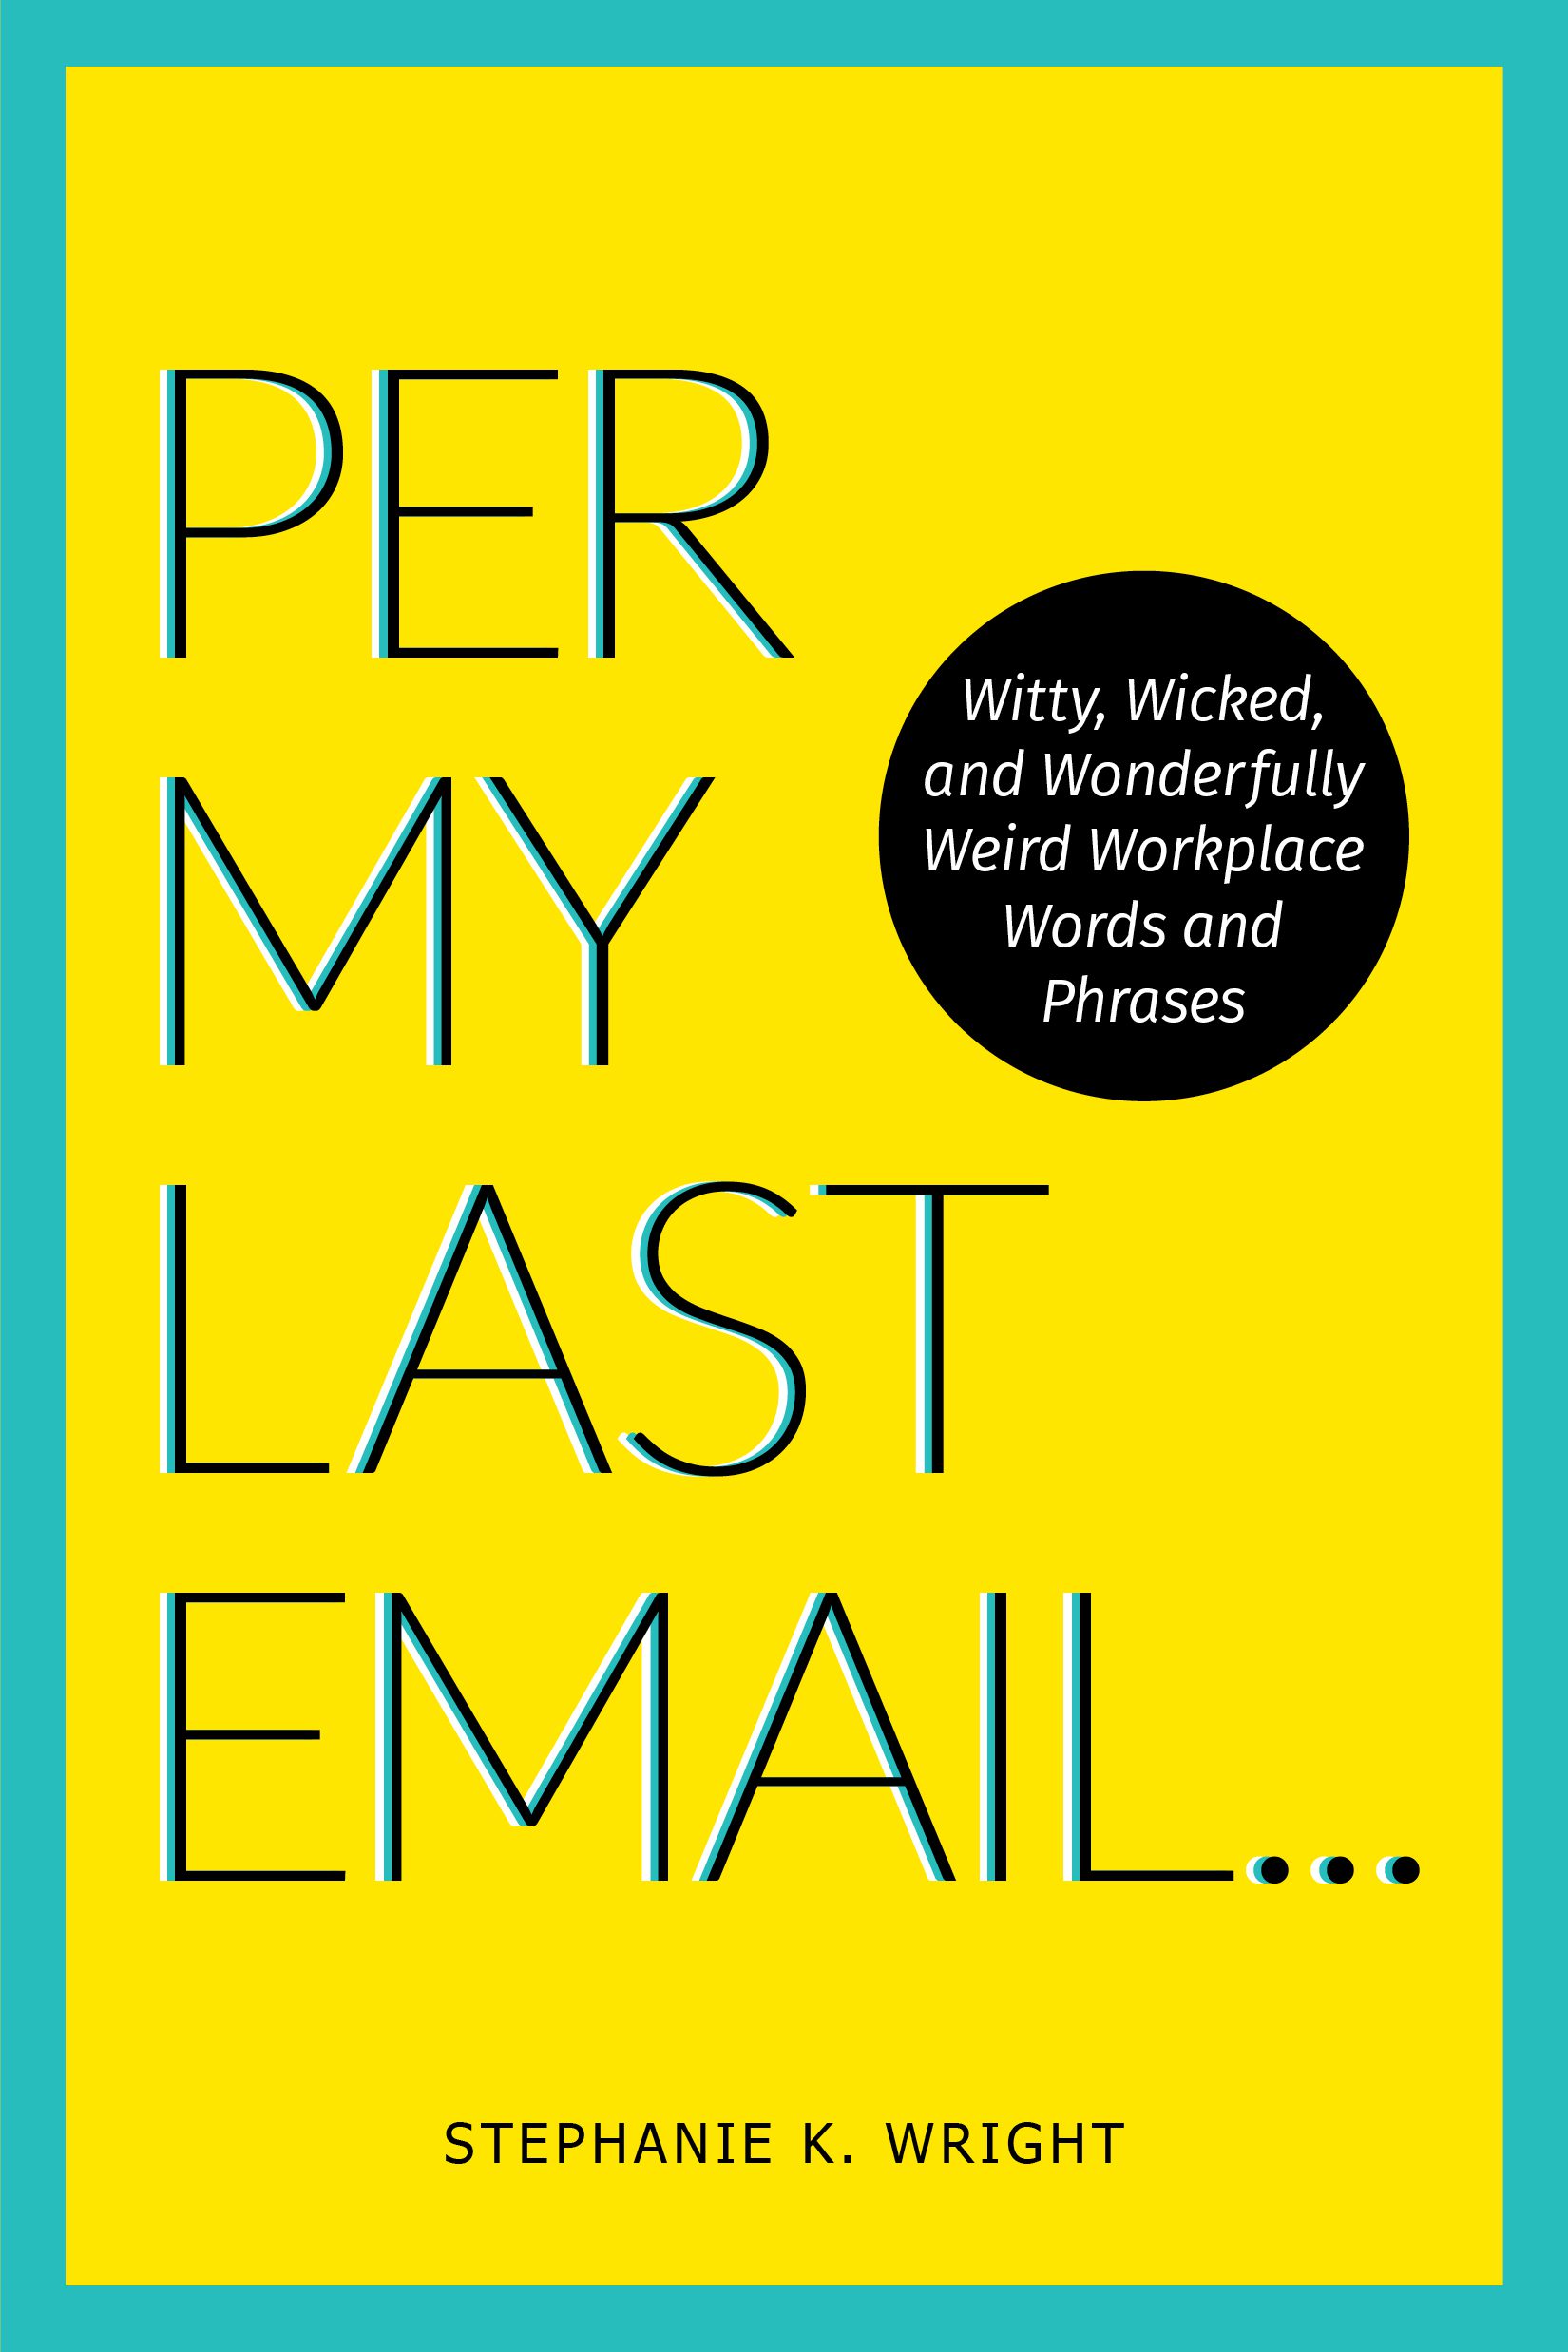 Per My Last Email: Curious Words and Clever Phrases to Vivify, Excite  Delight Your Work World